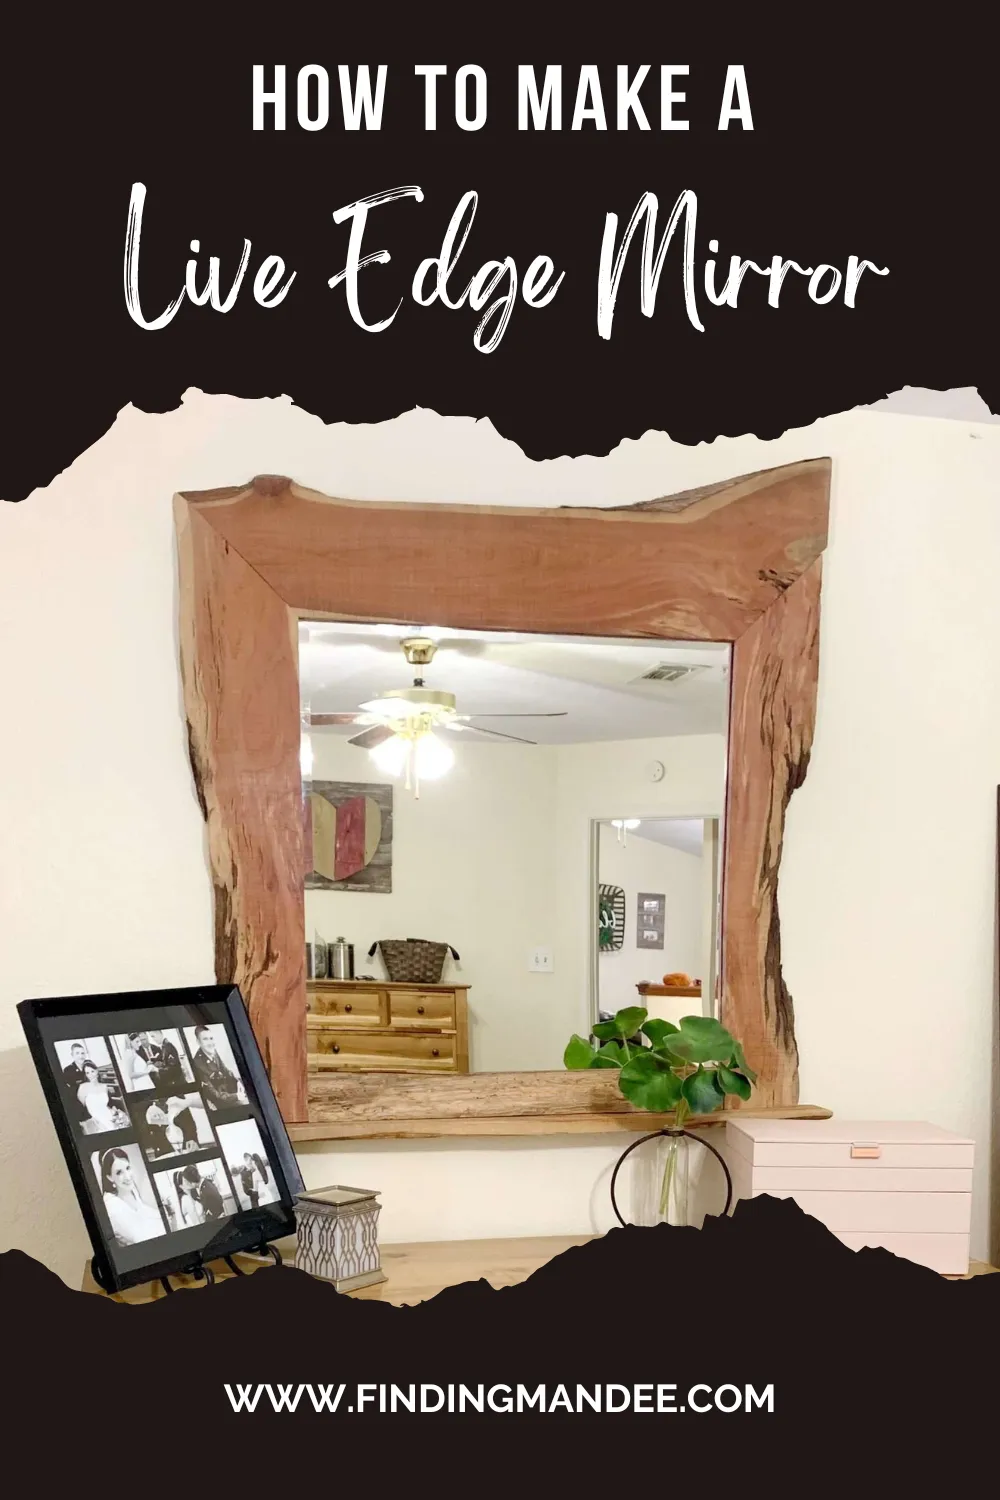 How to Make a Live Edge Mirror | Finding Mandee